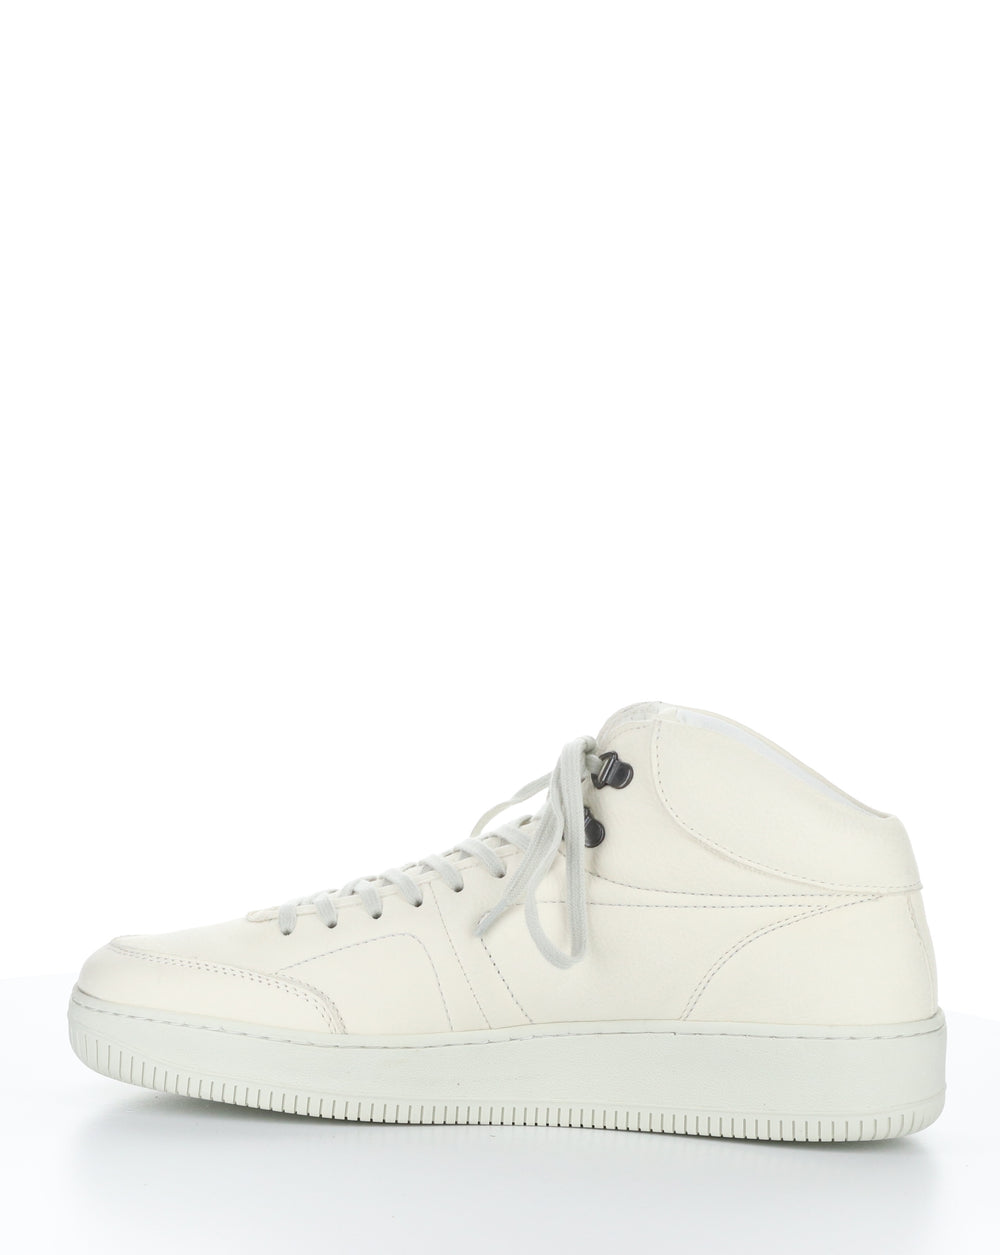 BEAP543FLY 001 OFF WHITE Hi-Top Shoes